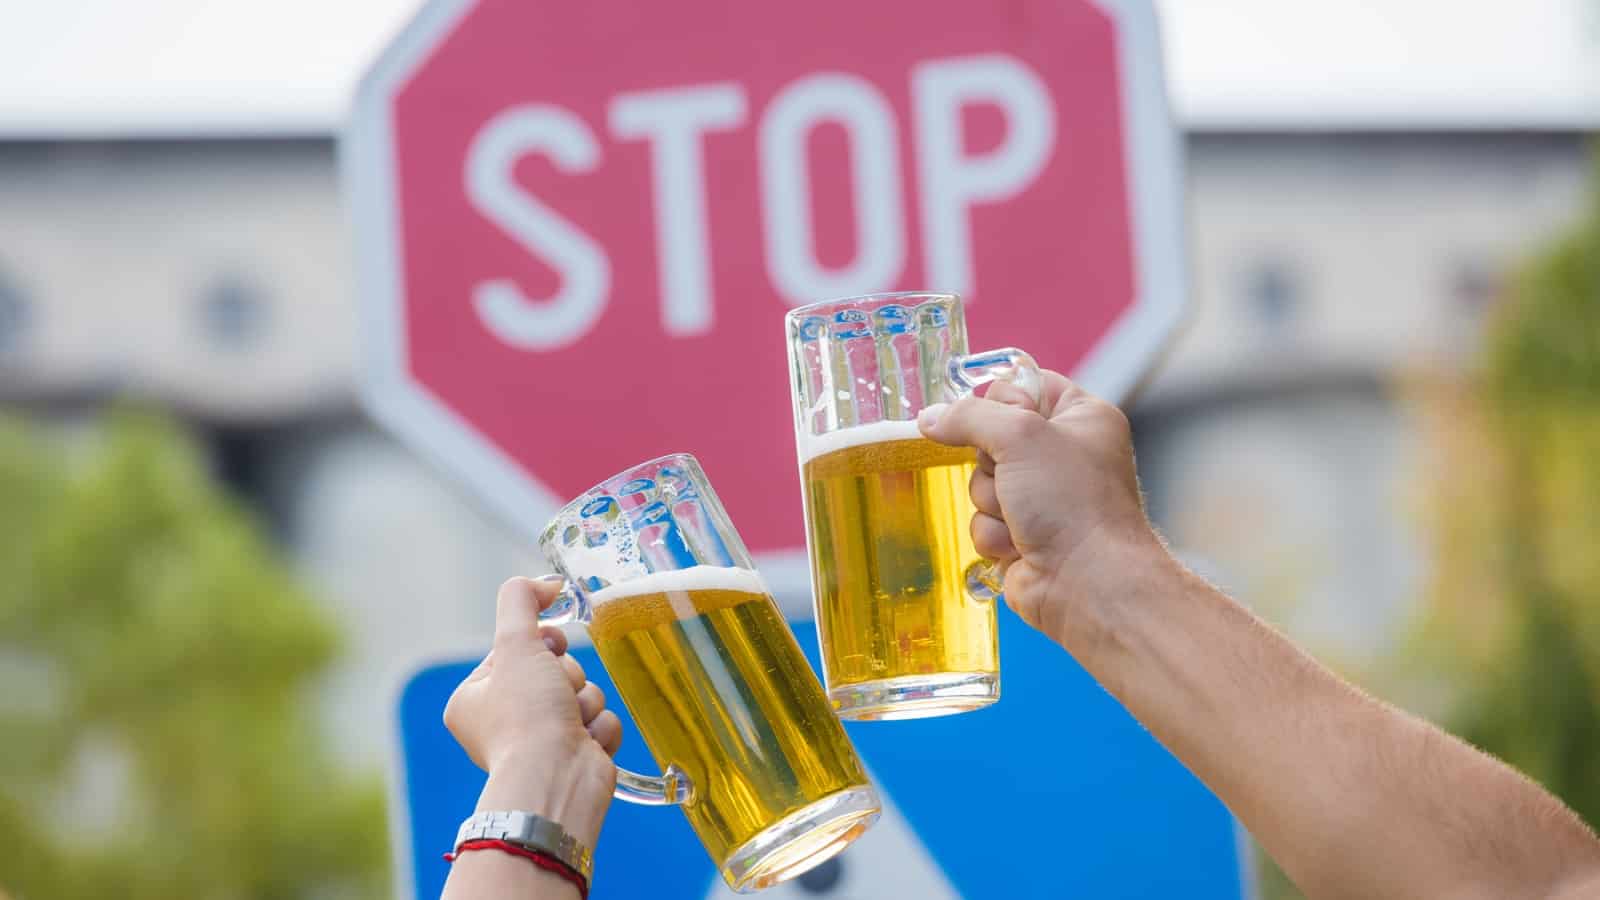 clinking glasses of beer in front of stop street sign